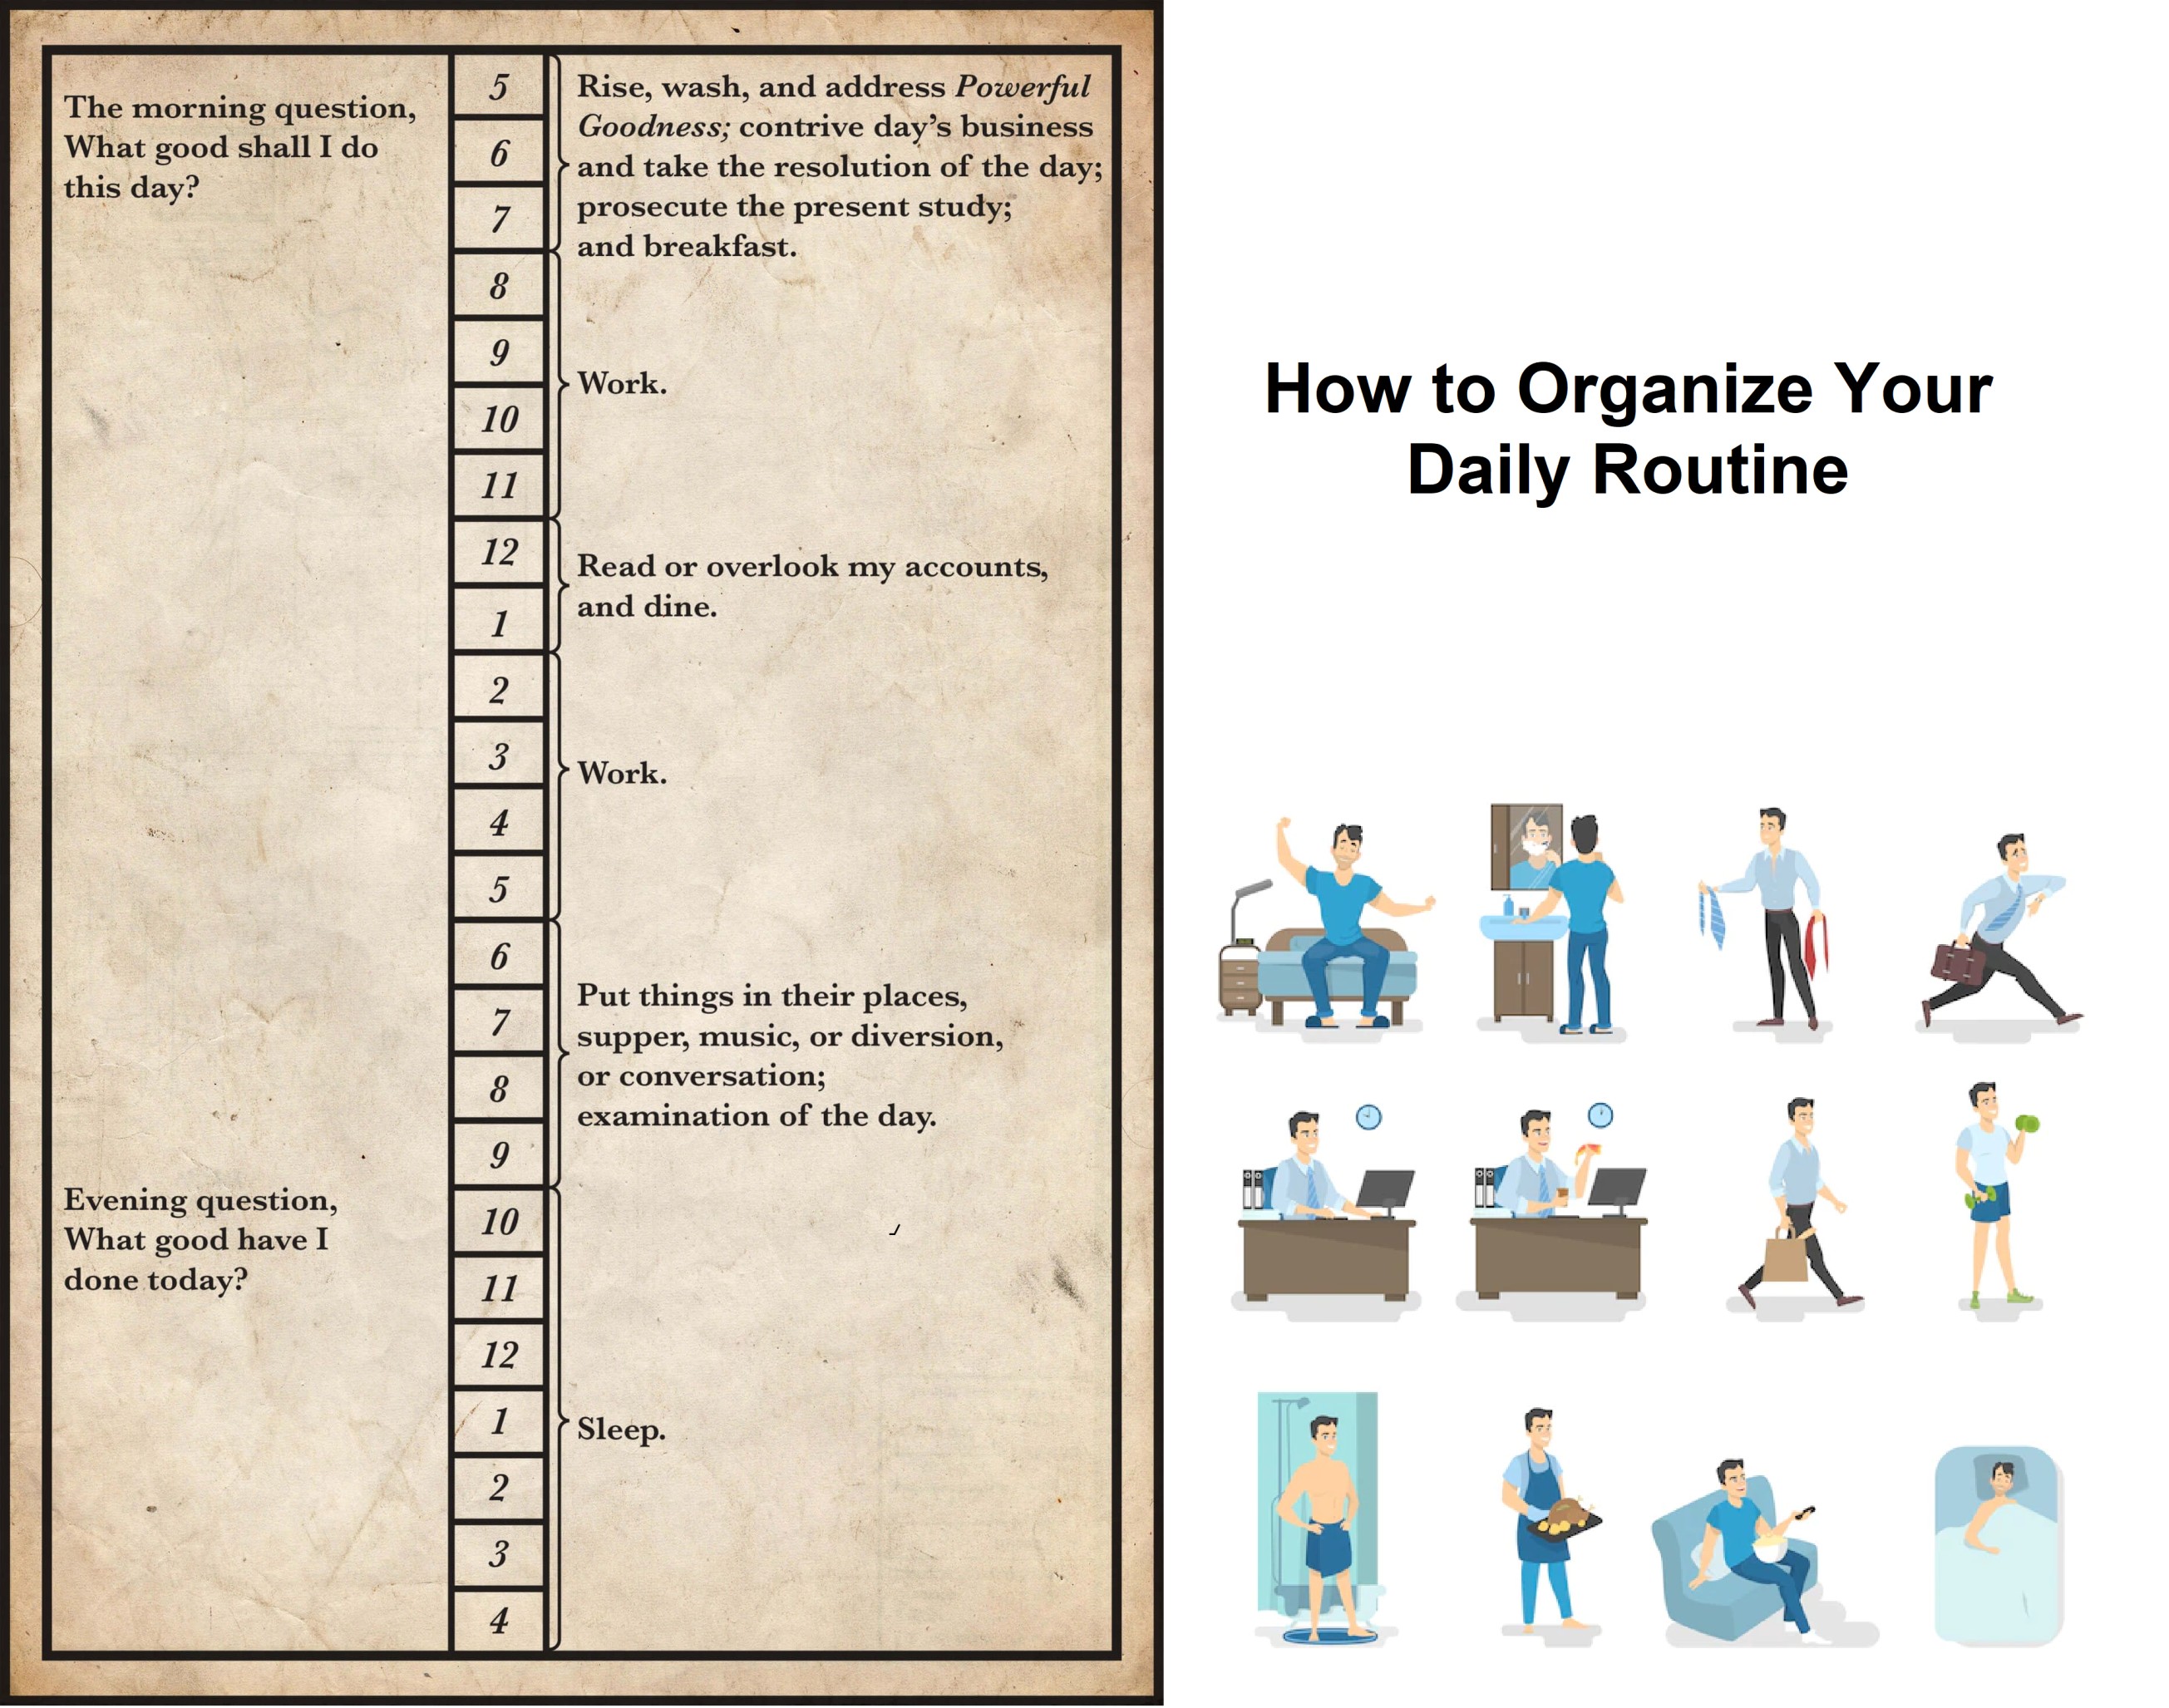 How to Organize Your Daily Routine